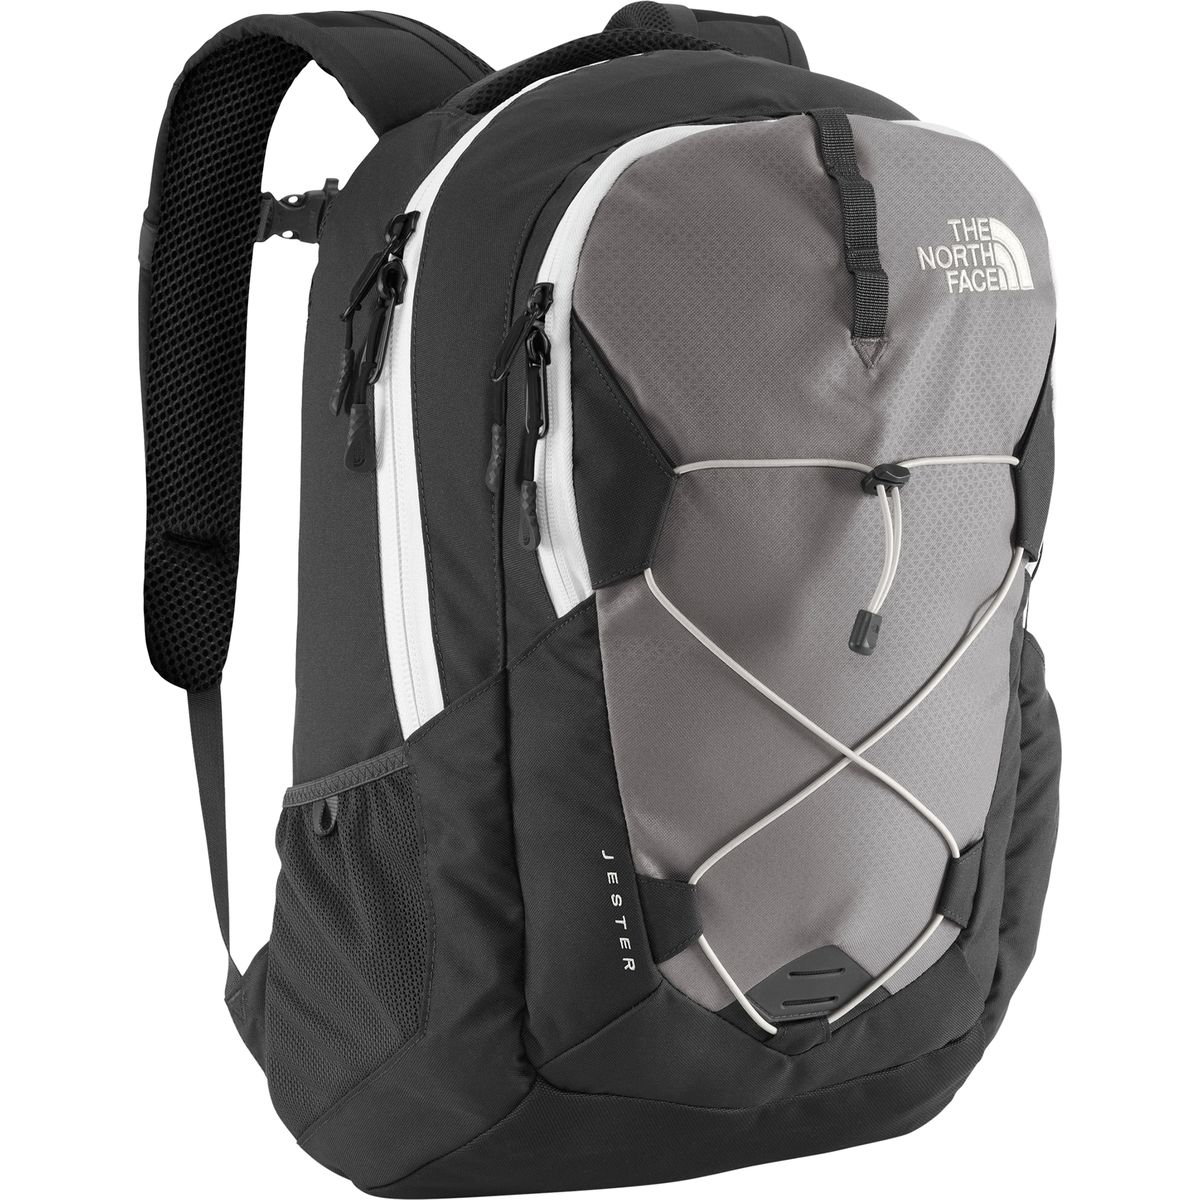 A Great Backpack: The Northface Jester